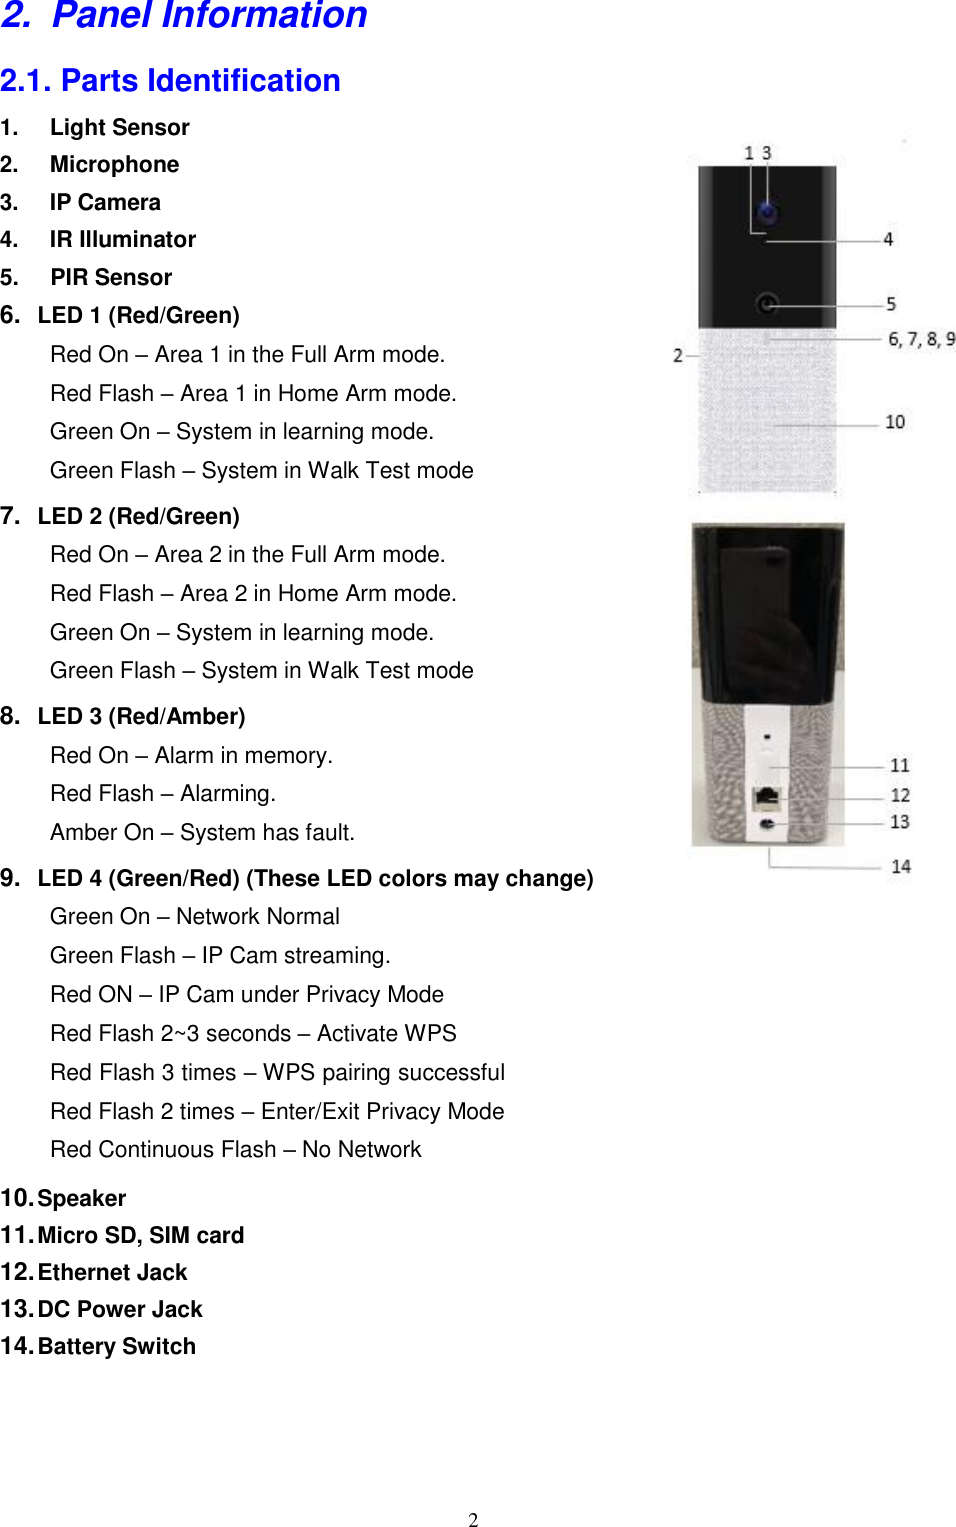 2  2.  Panel Information 2.1. Parts Identification 1. Light Sensor 2. Microphone 3. IP Camera 4. IR Illuminator 5.   PIR Sensor 6. LED 1 (Red/Green) Red On – Area 1 in the Full Arm mode. Red Flash – Area 1 in Home Arm mode. Green On – System in learning mode. Green Flash – System in Walk Test mode 7. LED 2 (Red/Green) Red On – Area 2 in the Full Arm mode. Red Flash – Area 2 in Home Arm mode. Green On – System in learning mode. Green Flash – System in Walk Test mode 8. LED 3 (Red/Amber) Red On – Alarm in memory. Red Flash – Alarming. Amber On – System has fault. 9. LED 4 (Green/Red) (These LED colors may change) Green On – Network Normal Green Flash – IP Cam streaming.  Red ON – IP Cam under Privacy Mode Red Flash 2~3 seconds – Activate WPS Red Flash 3 times – WPS pairing successful Red Flash 2 times – Enter/Exit Privacy Mode Red Continuous Flash – No Network 10. Speaker 11. Micro SD, SIM card  12. Ethernet Jack 13. DC Power Jack 14. Battery Switch 